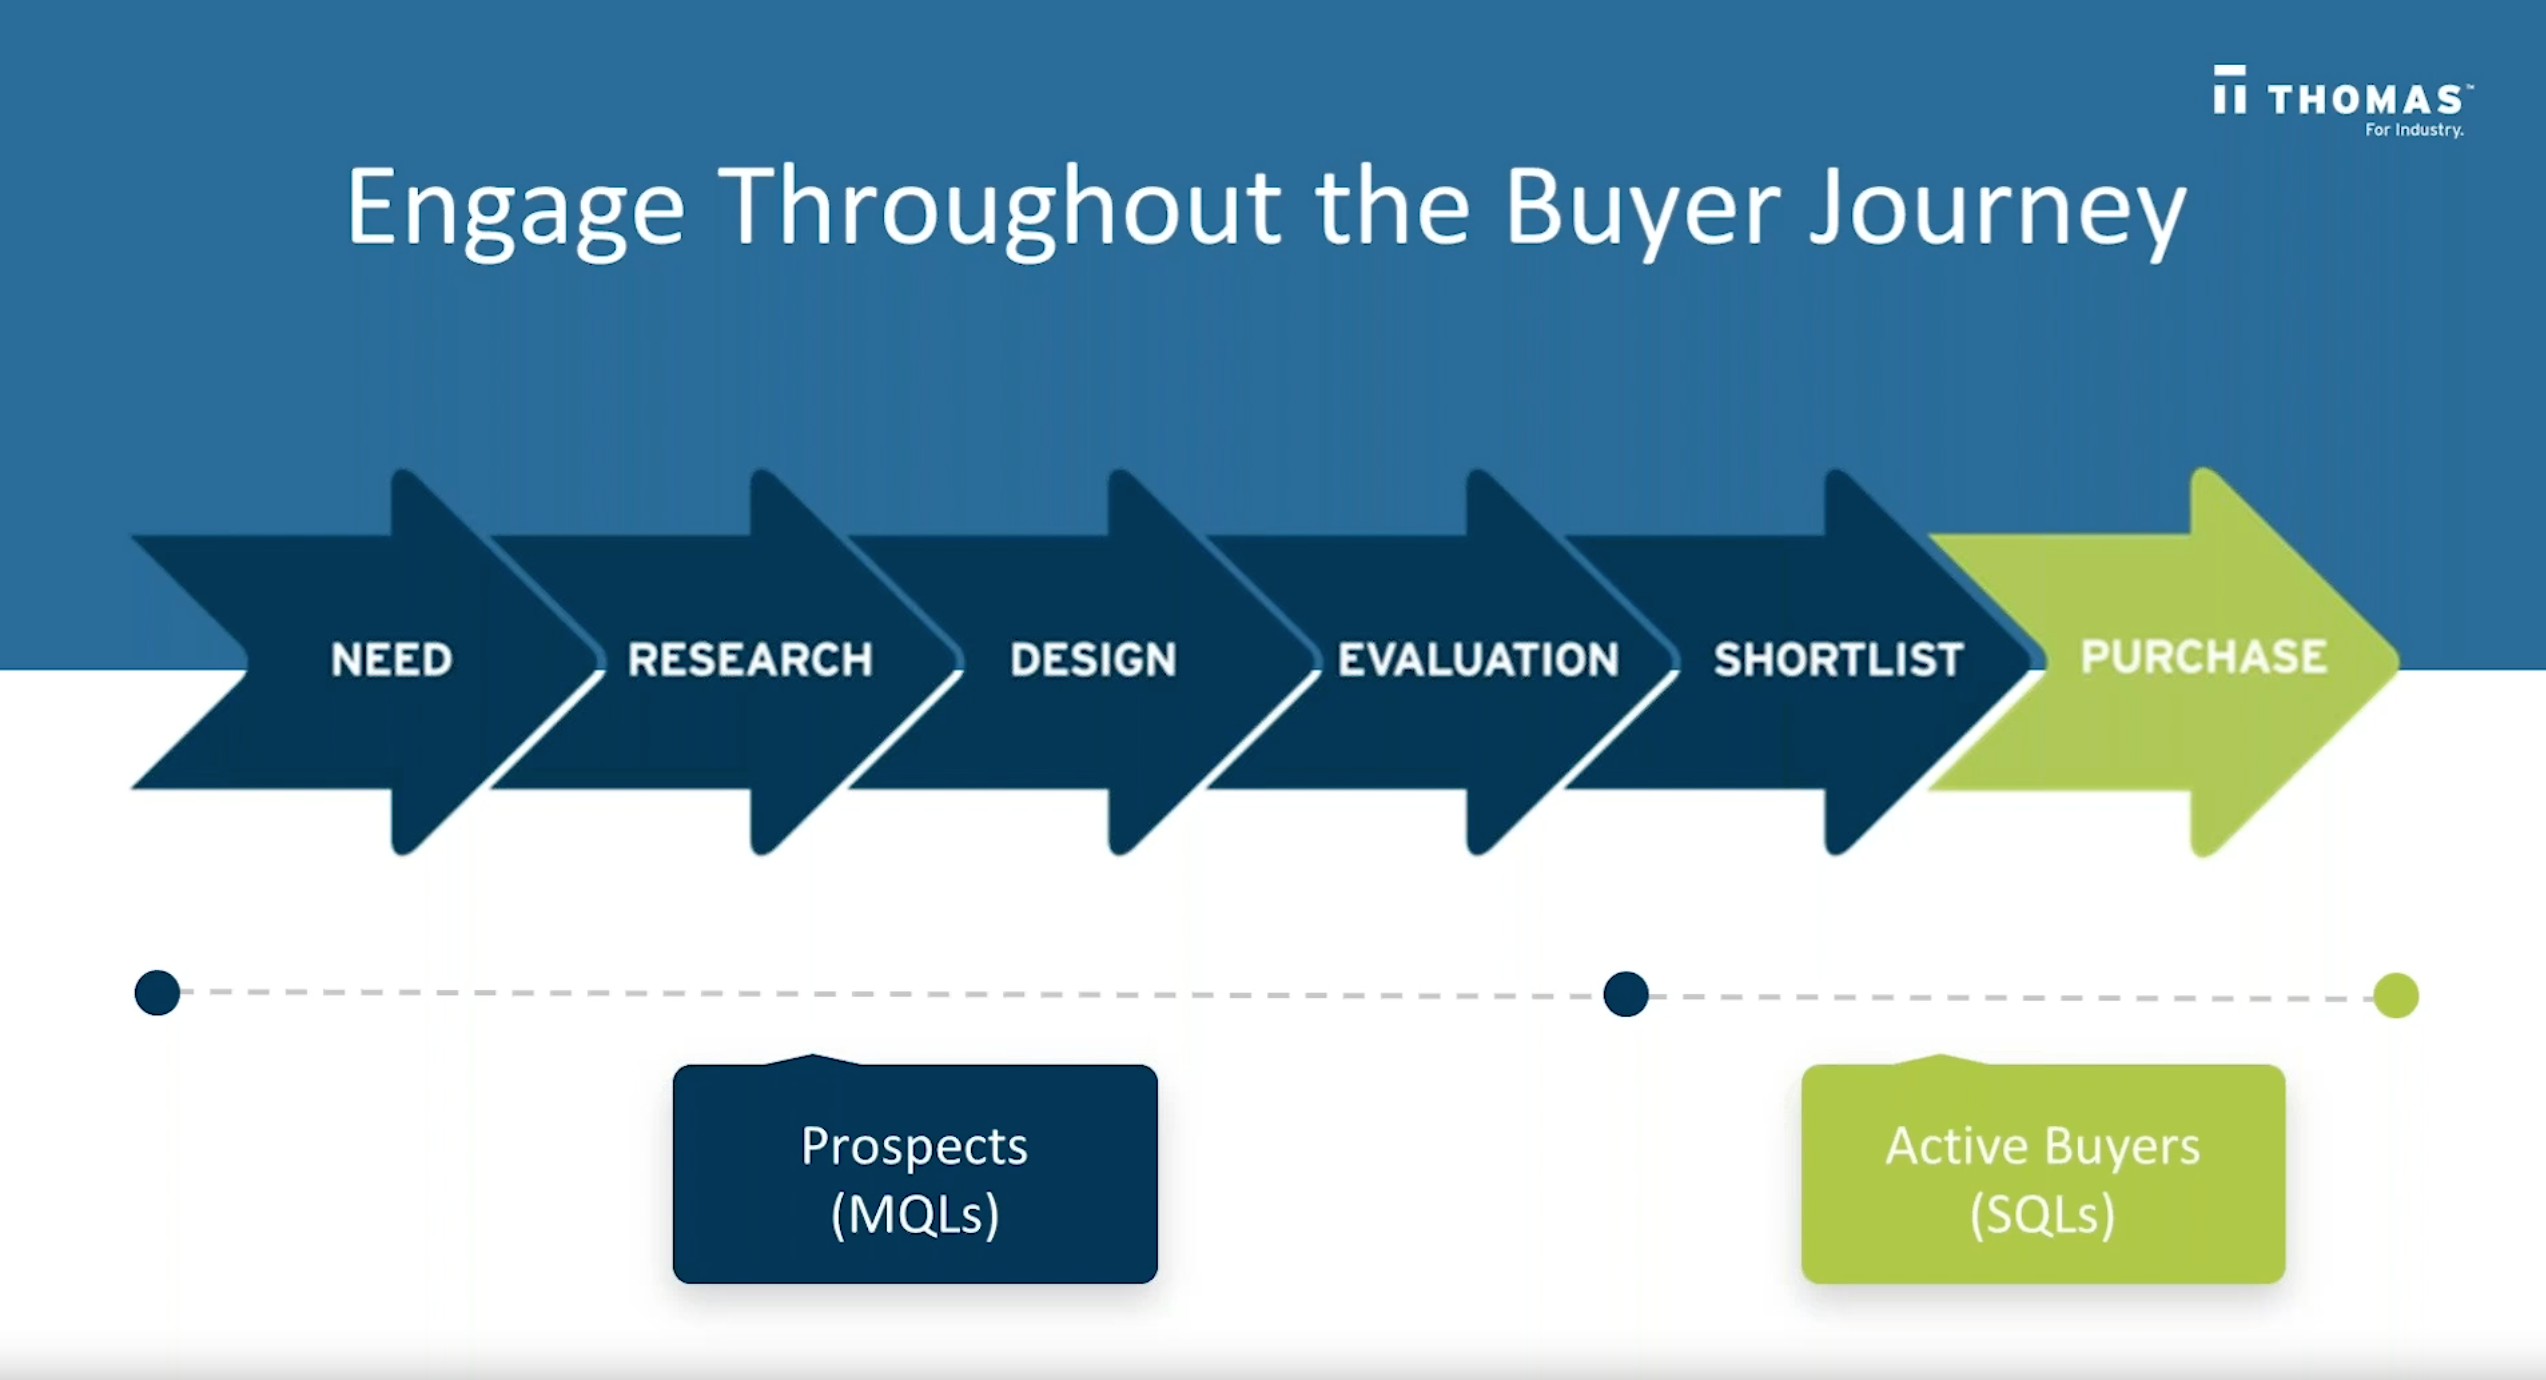 Industrial Buying Process - Marketing Challenge For Manufacturers